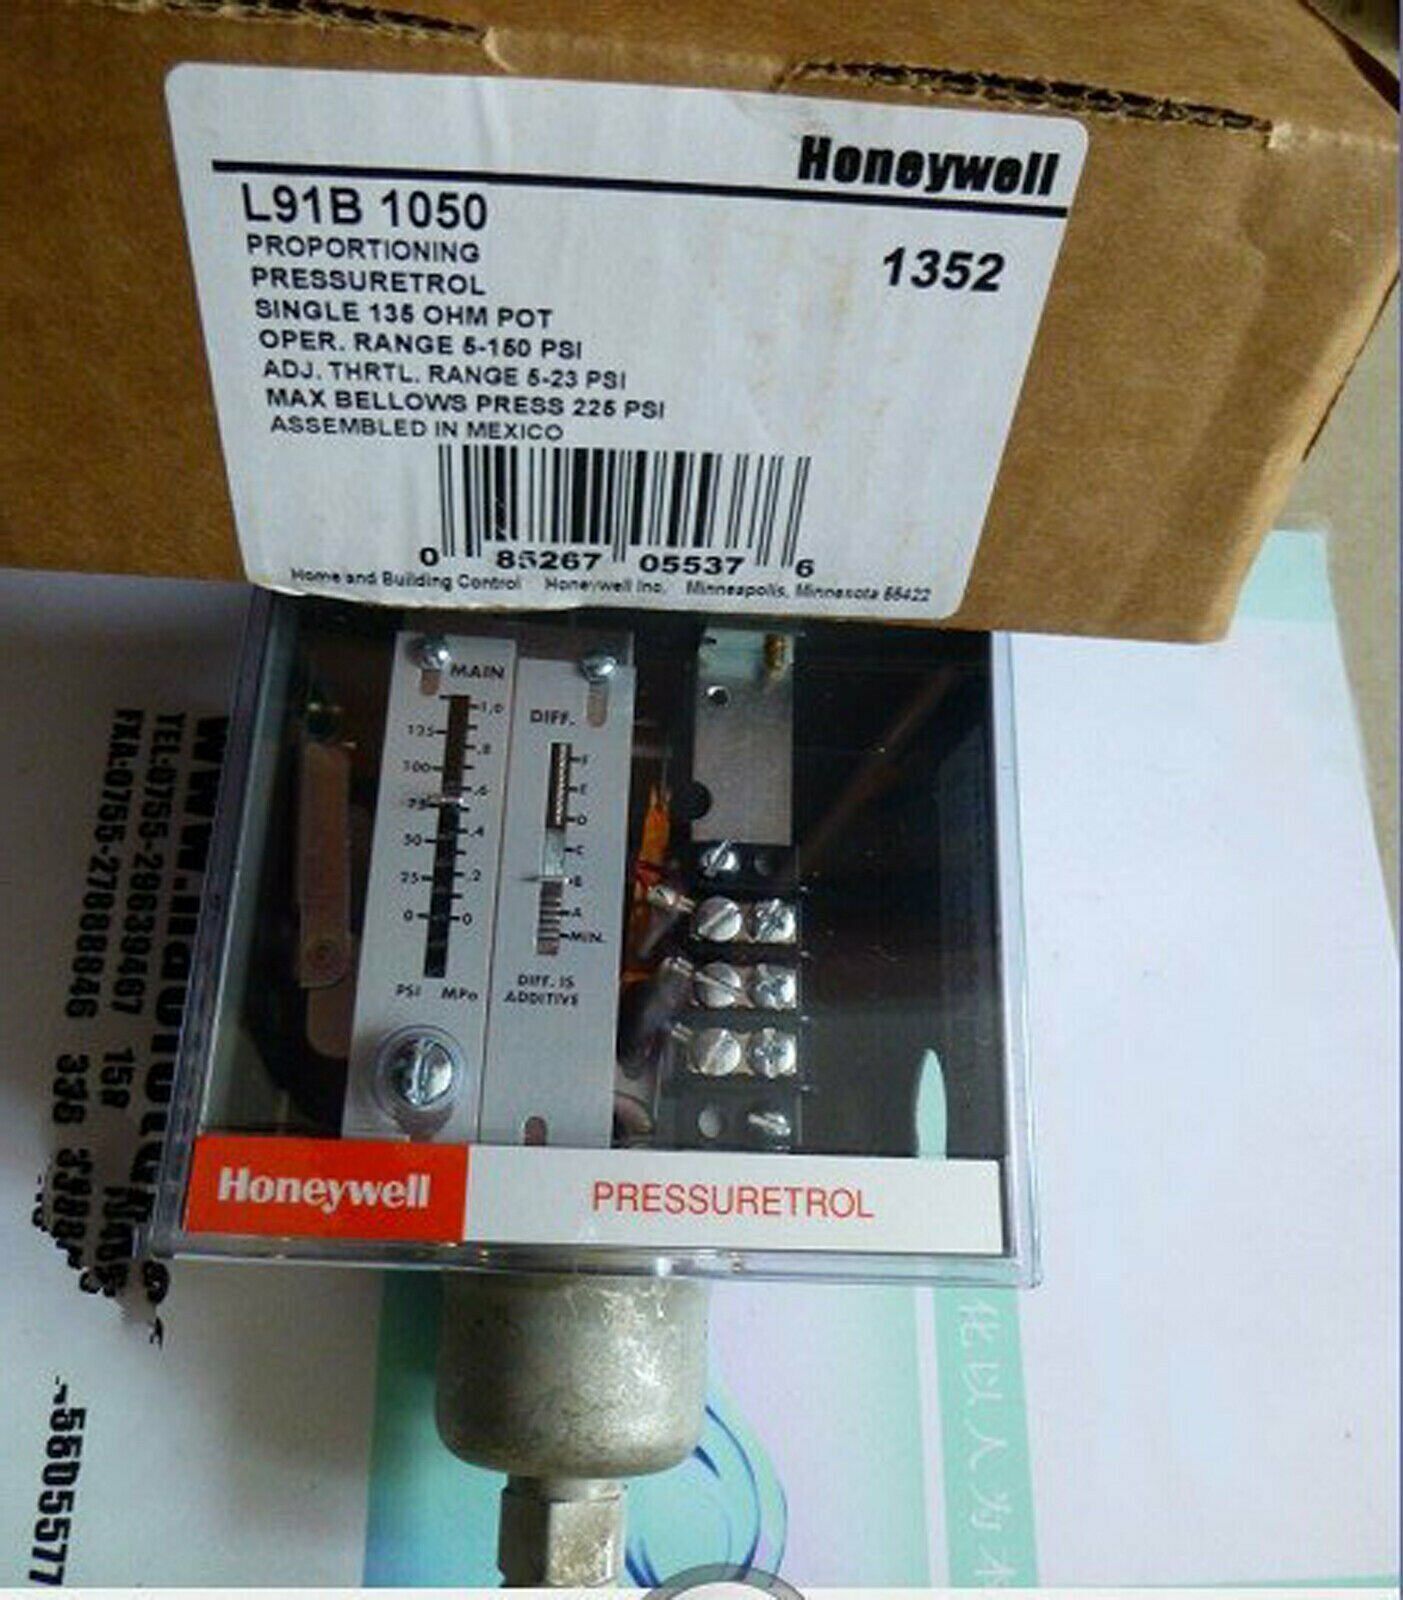 1PC New Honeywell L91B1050 Pressuretrol Controller In Box Expedited Shipping